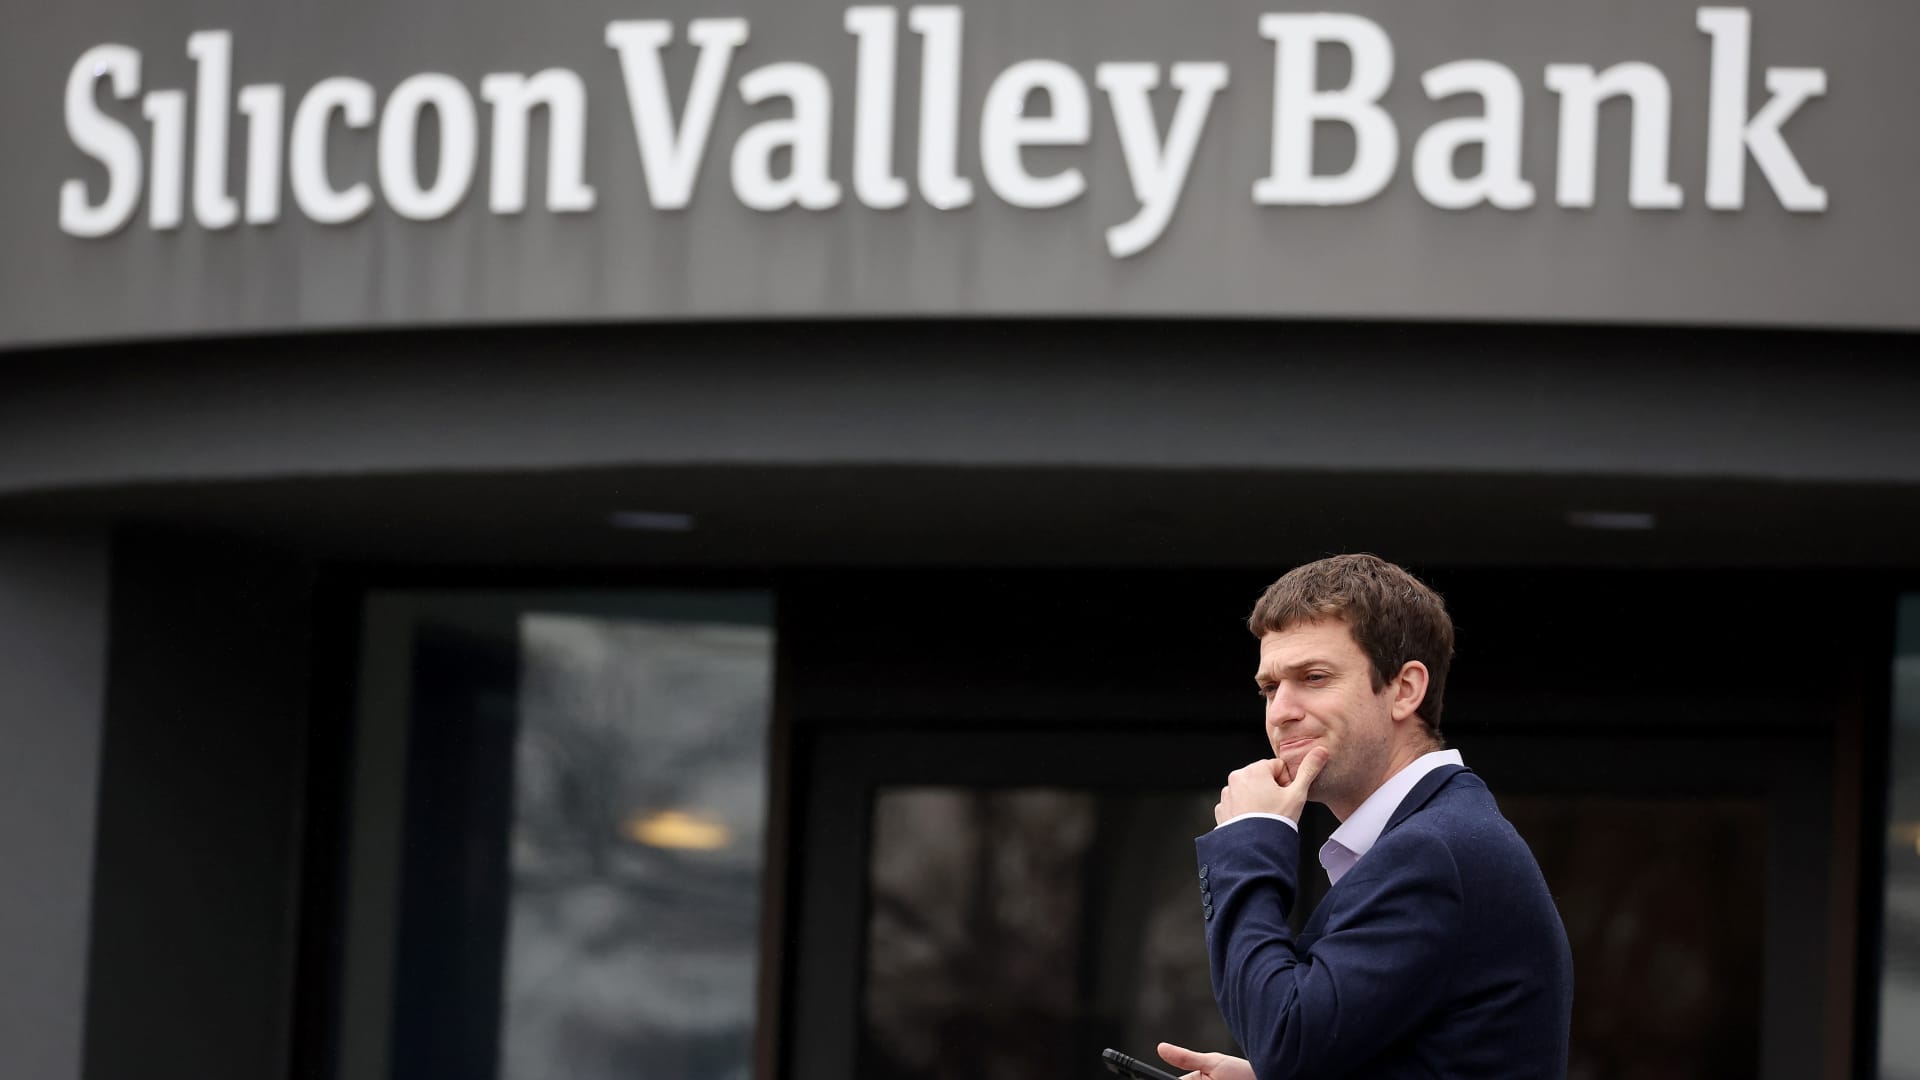 Here's what could happen next for Silicon Valley Bank customers